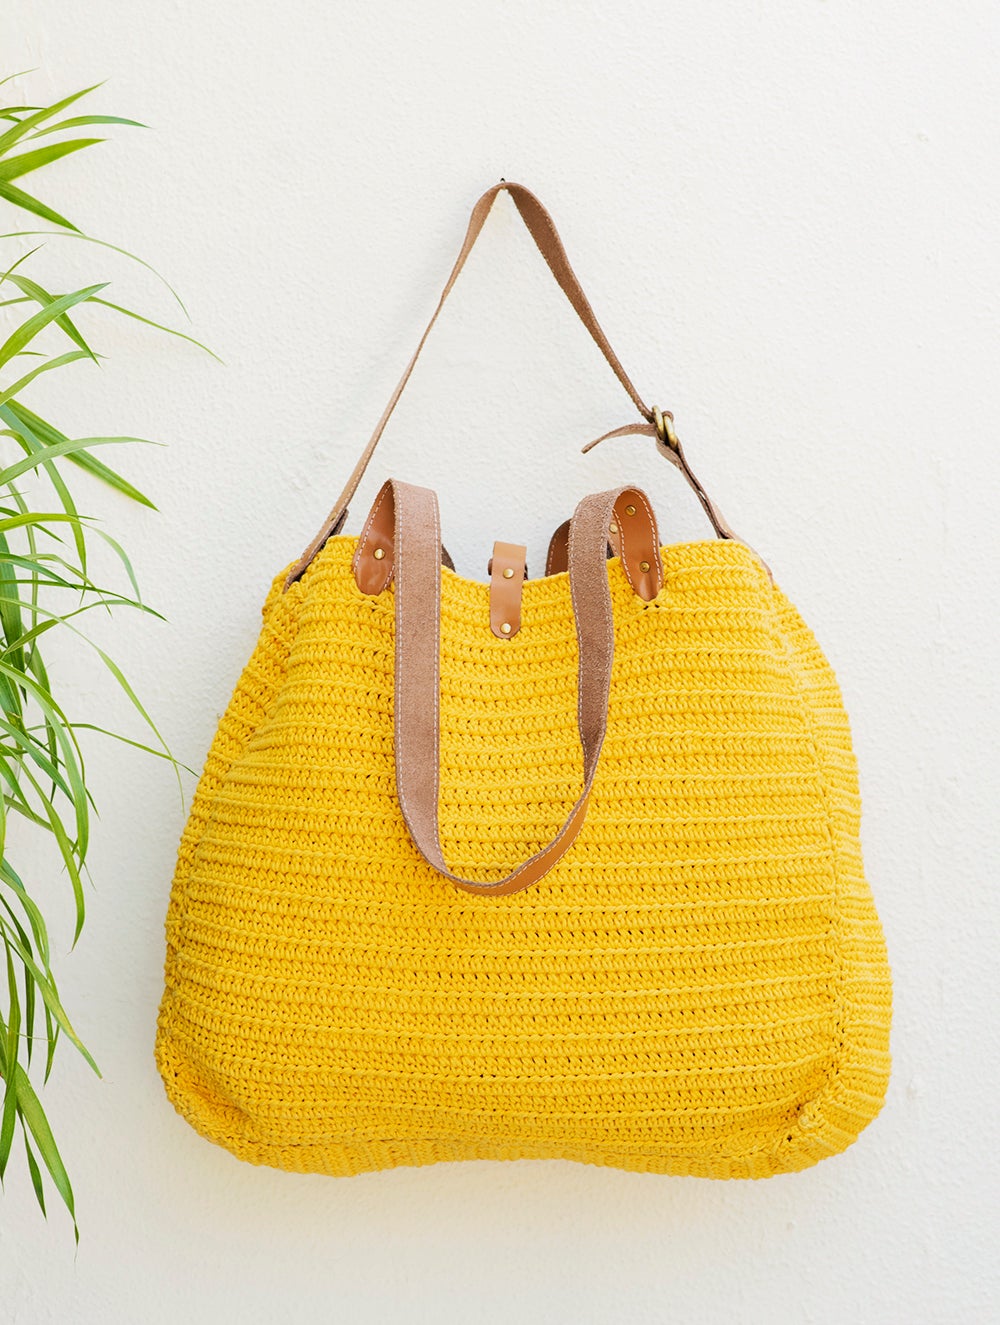 Buy Small Woven Tote Bag - Yellow and White Online